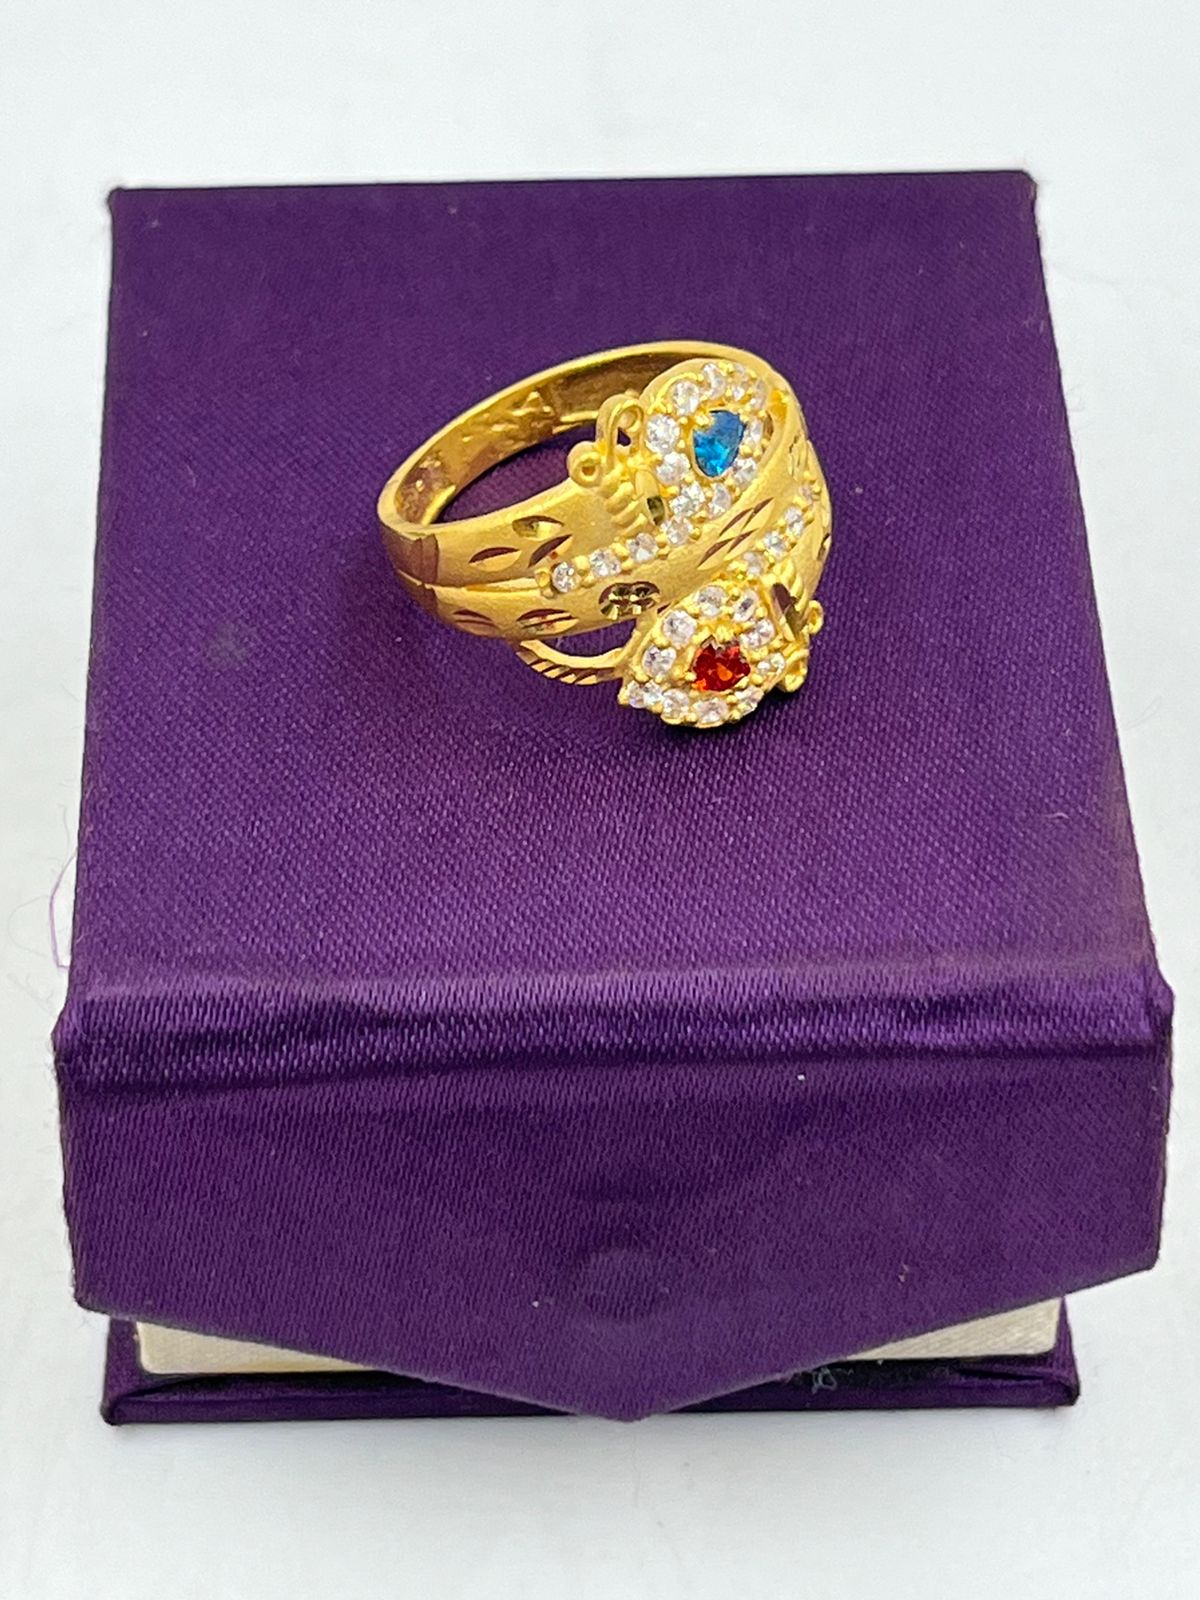 22K Leaf Pattern Daily Wear Ladies Gold Ring, 5g at Rs 30000 in New Delhi |  ID: 2852504883948